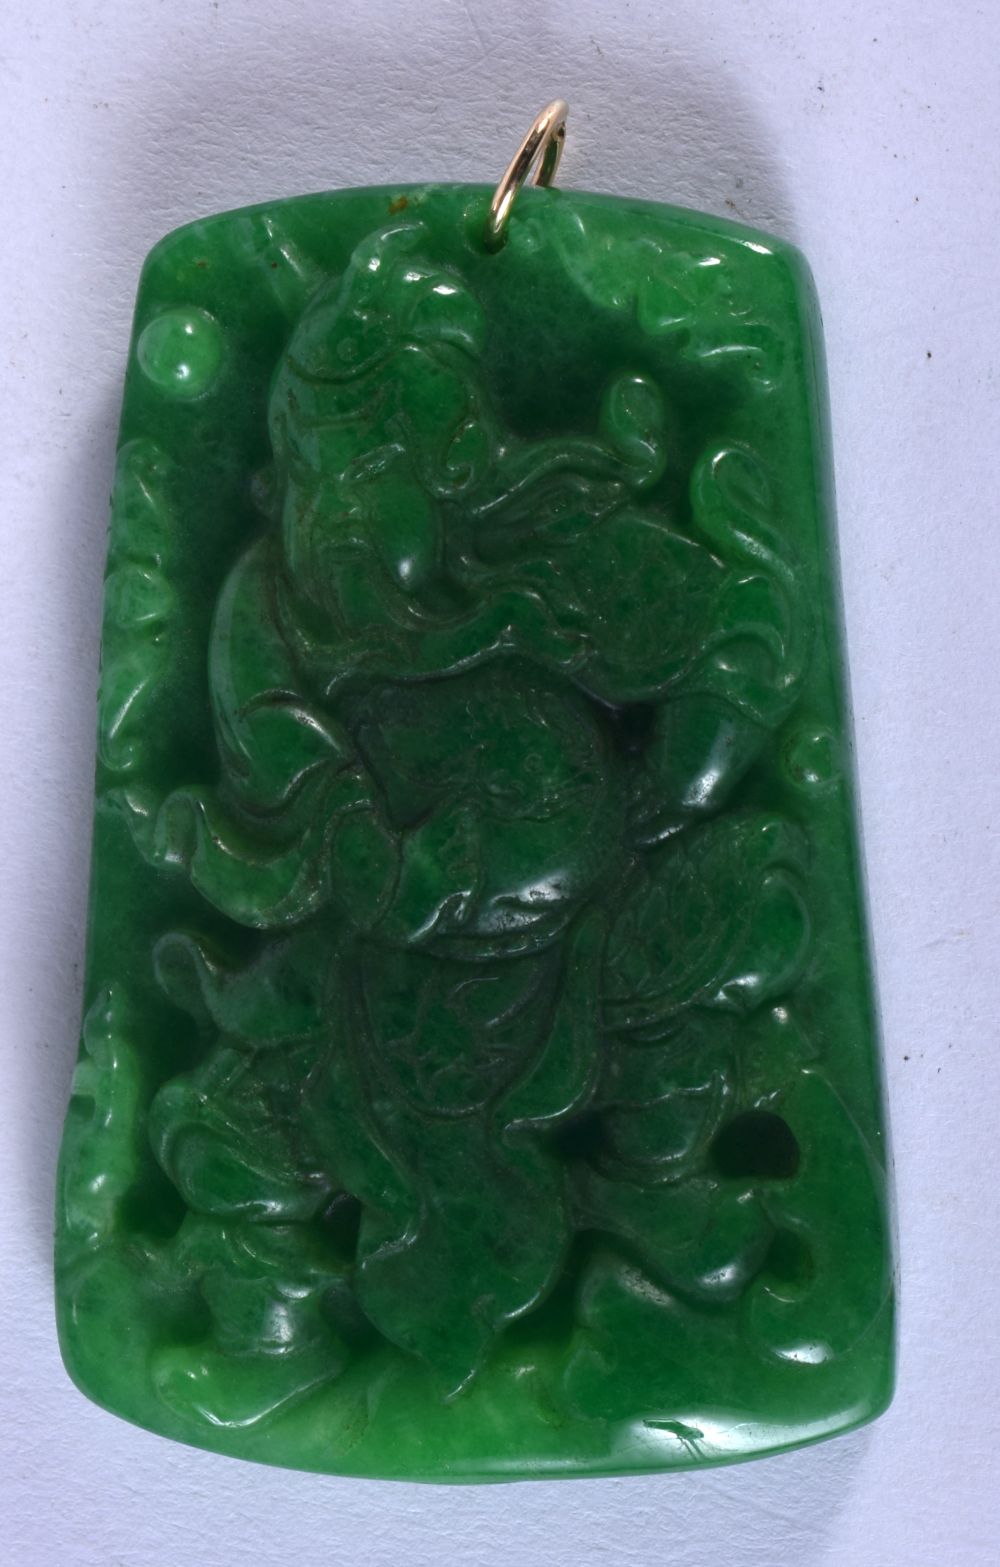 A CHINESE JADE PENDANT CARVED WITH AN IMMORTAL. 6.4cm x 4.2cm, weight 42g